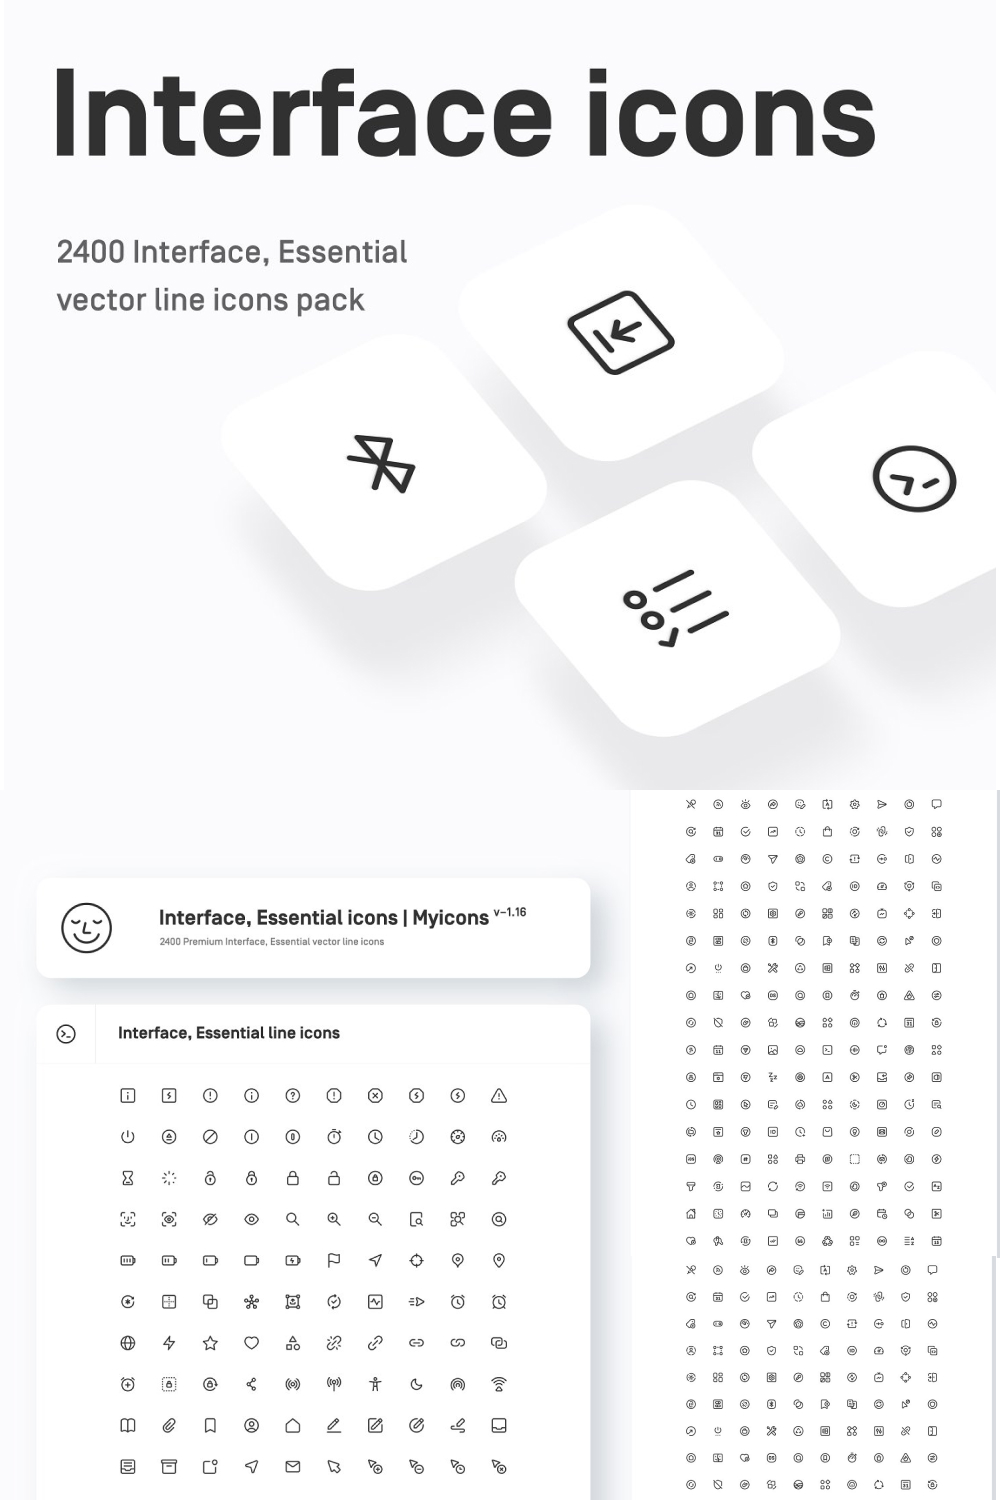 Interface, Essential, UI Line Icons - Pinterest.